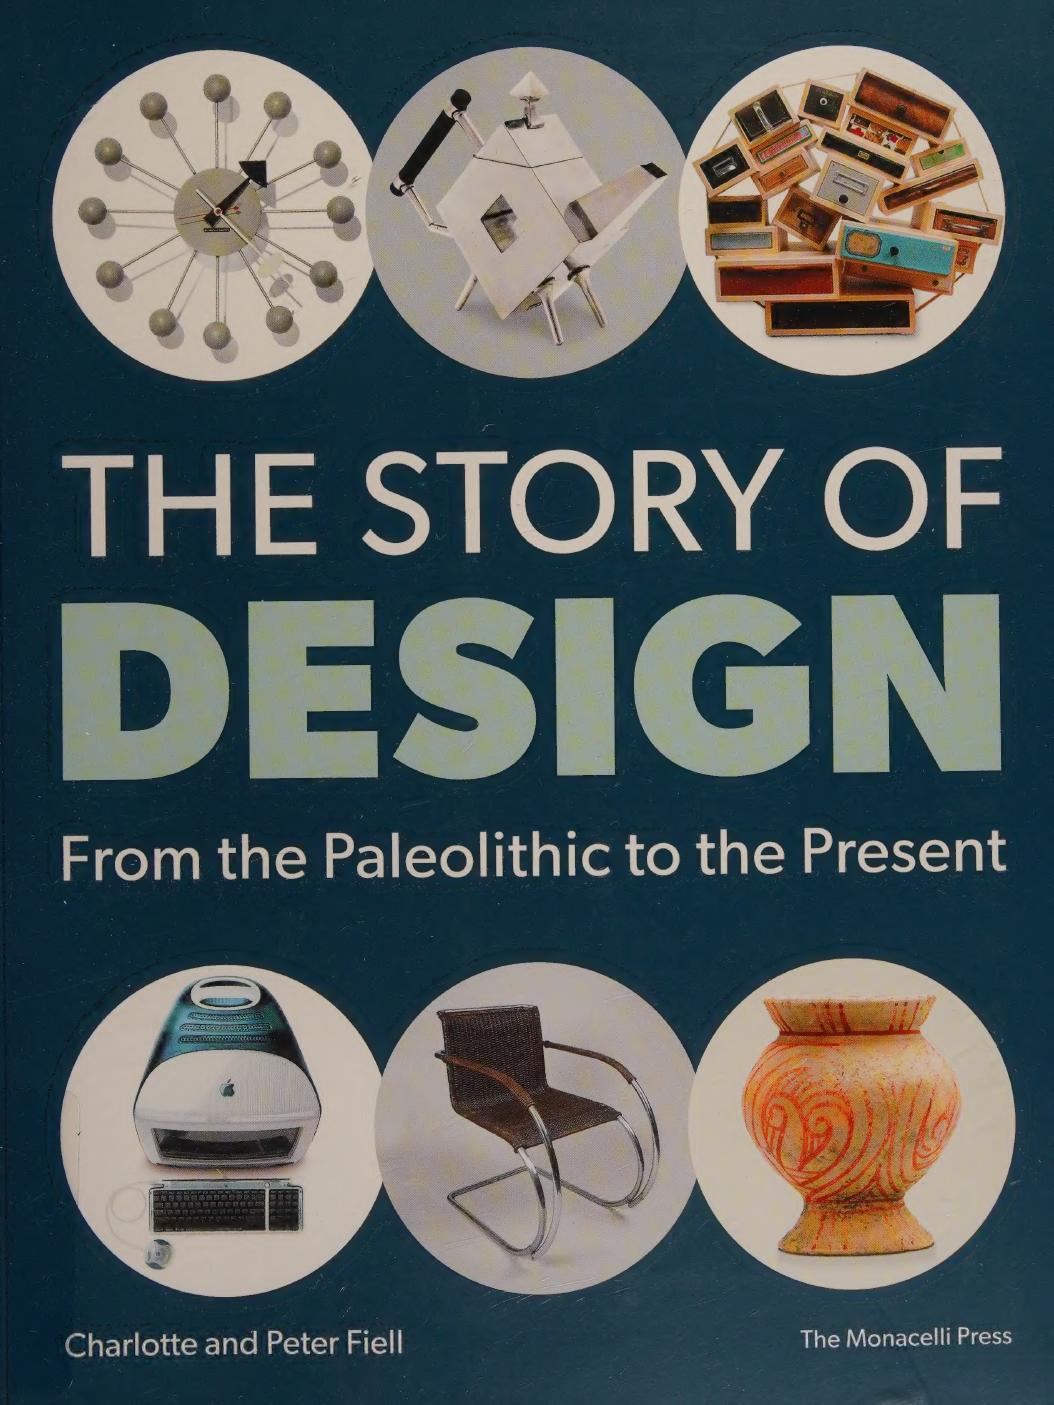 The Story of Design: From the Paleolithic to the Present by Charlotte Fiell Peter Fiell